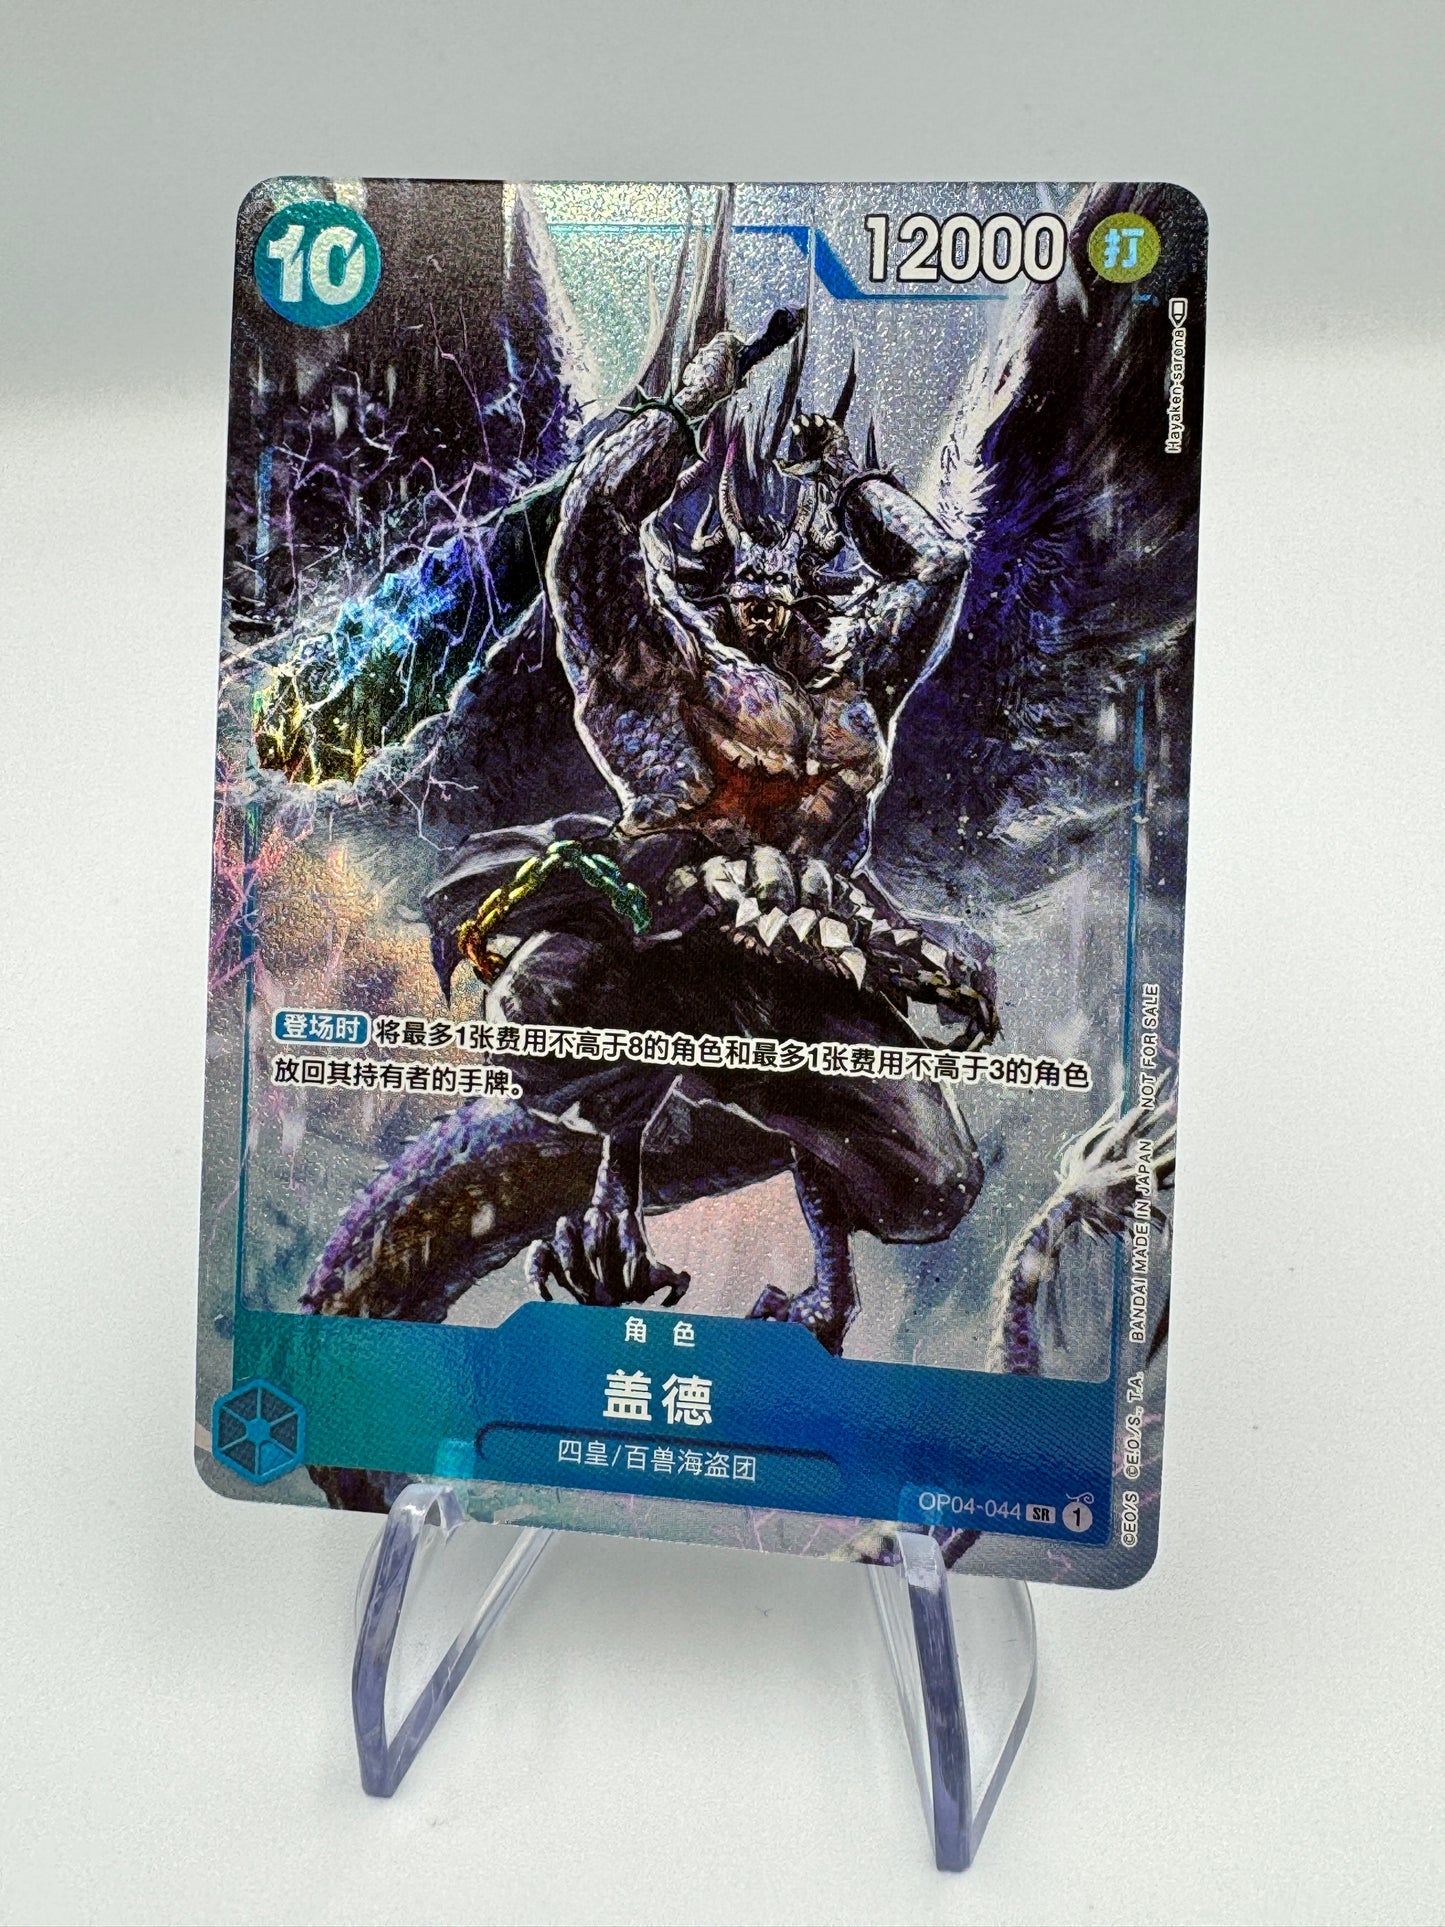 Kaido OP04-044 SR version chinoise exclusive